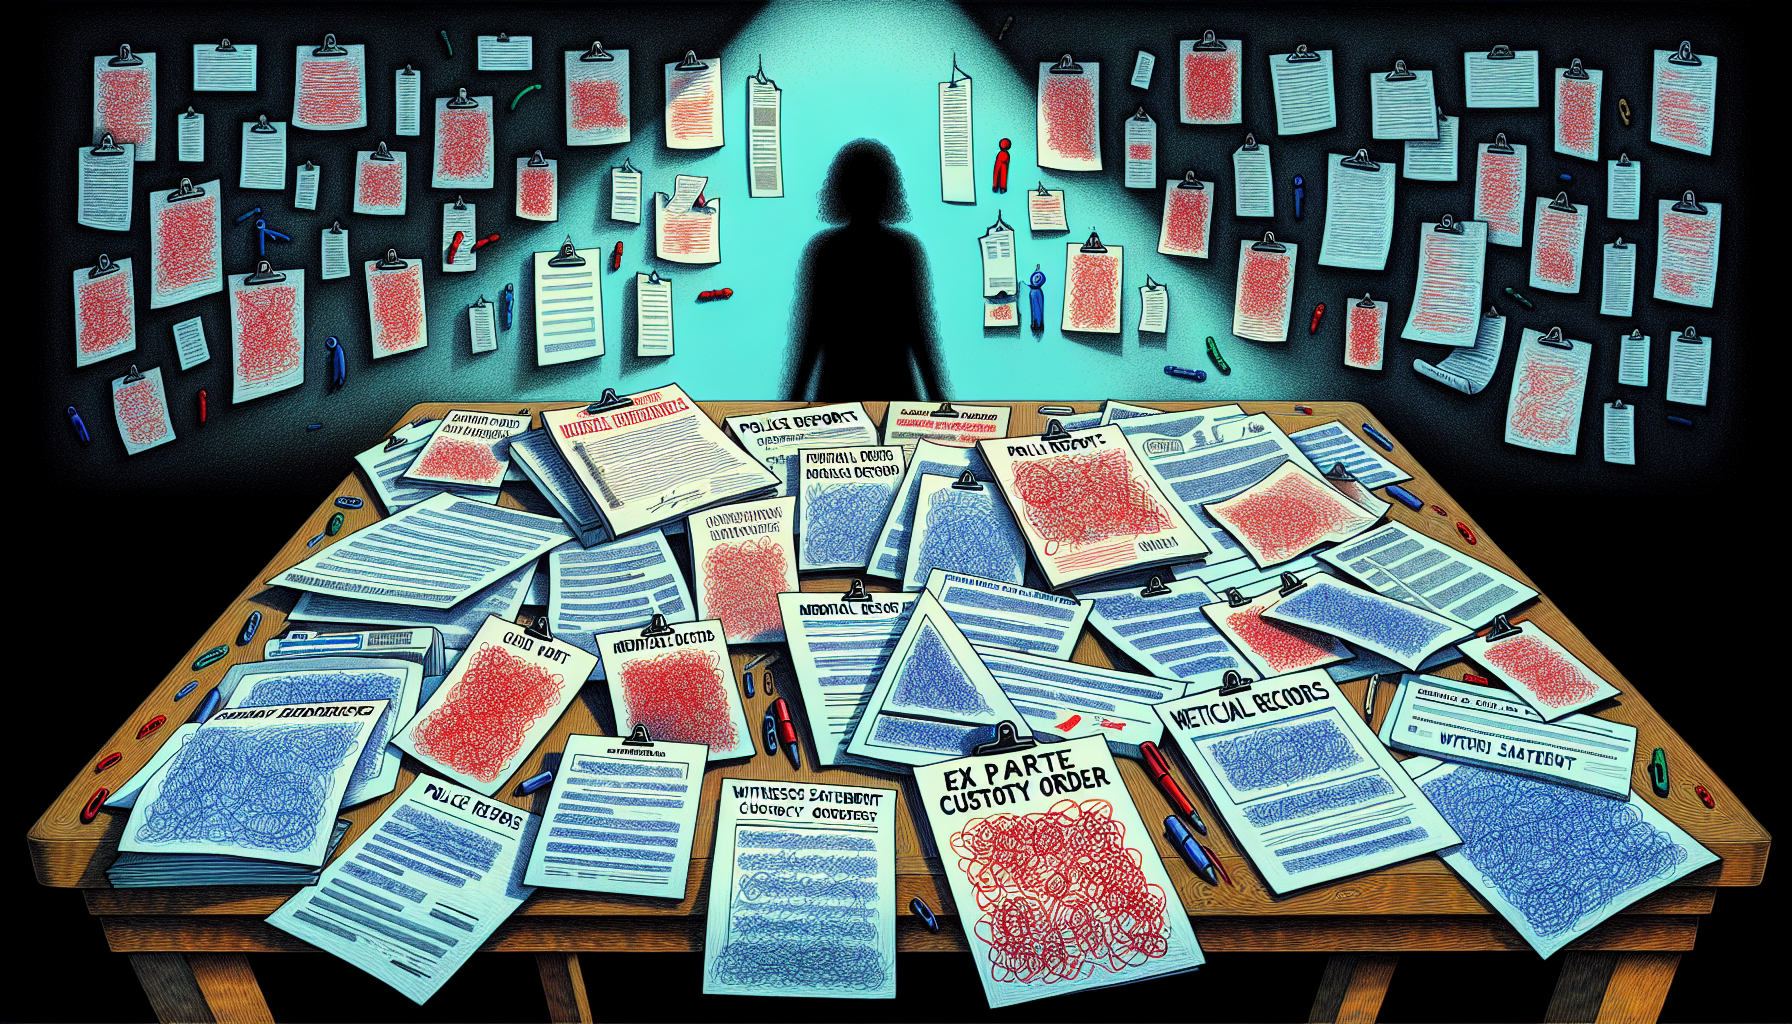 Illustration of police reports, medical records, and witness statements